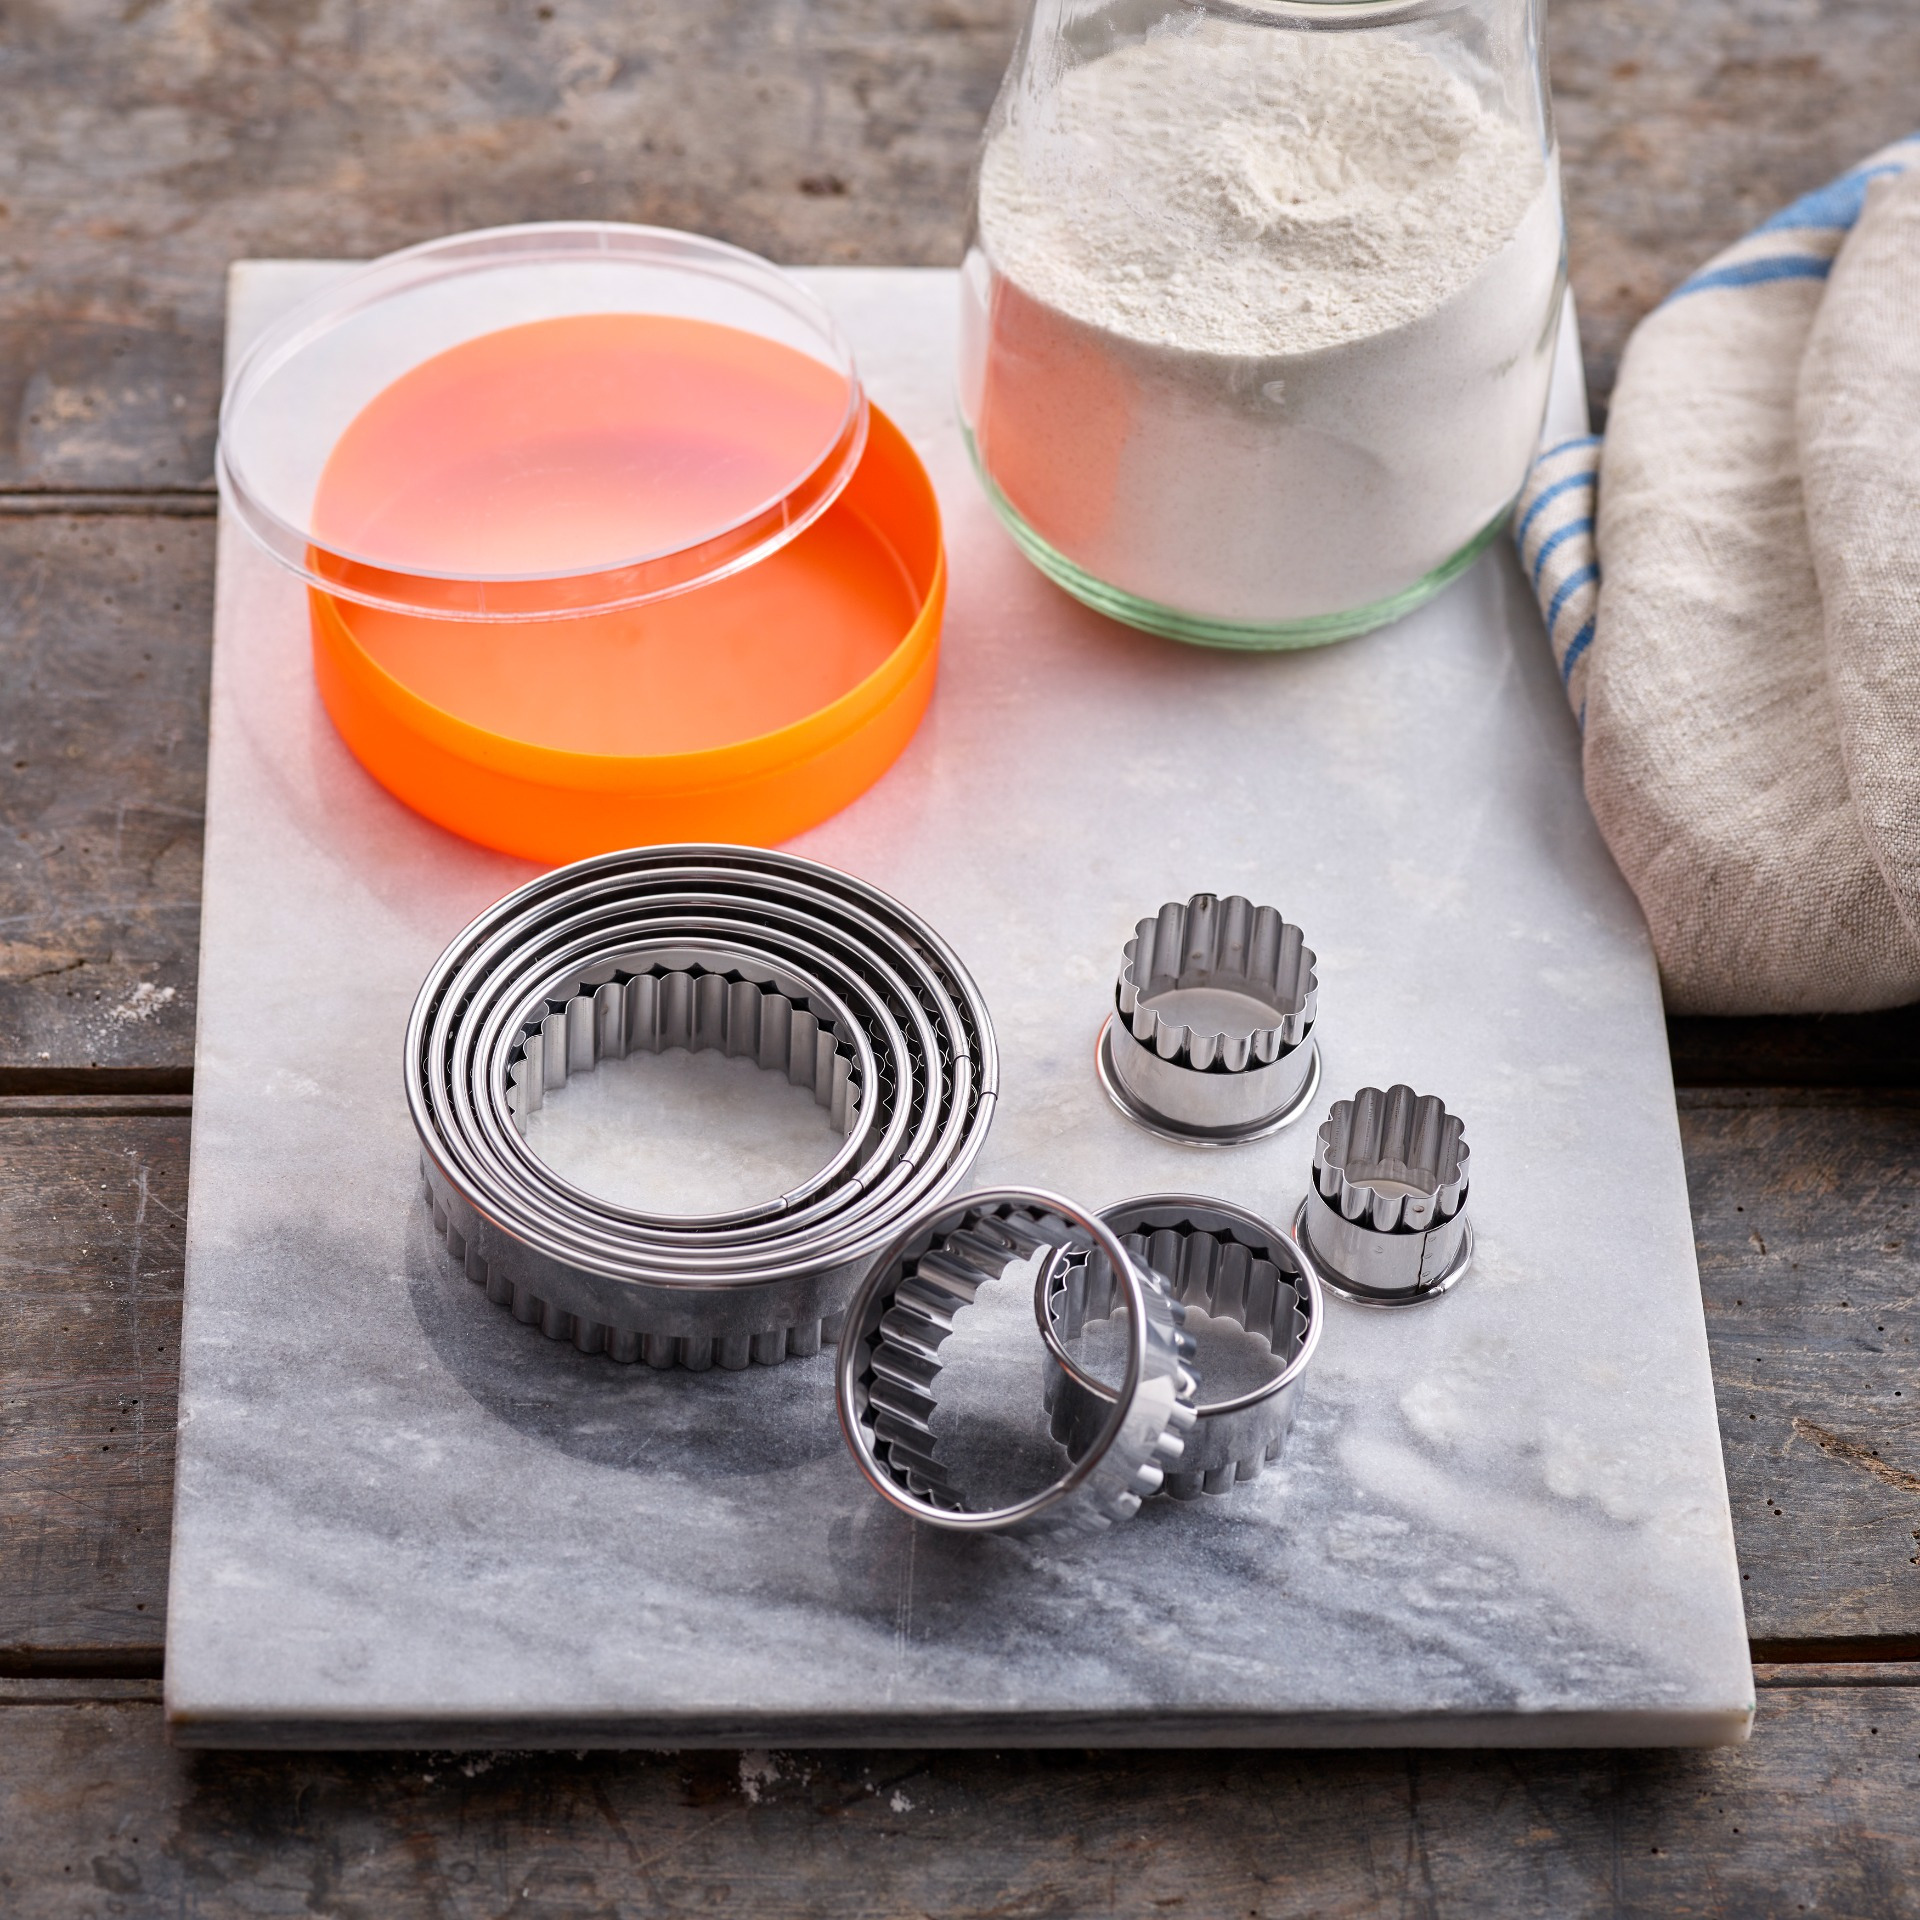 https://www.bakerybits.co.uk/media/catalog/product/cache/0096d319b30710f494afd1fc027ba44c/image/28923ce4/pro-stainless-pastry-cutters-round-corrugated-set-of-9.jpg